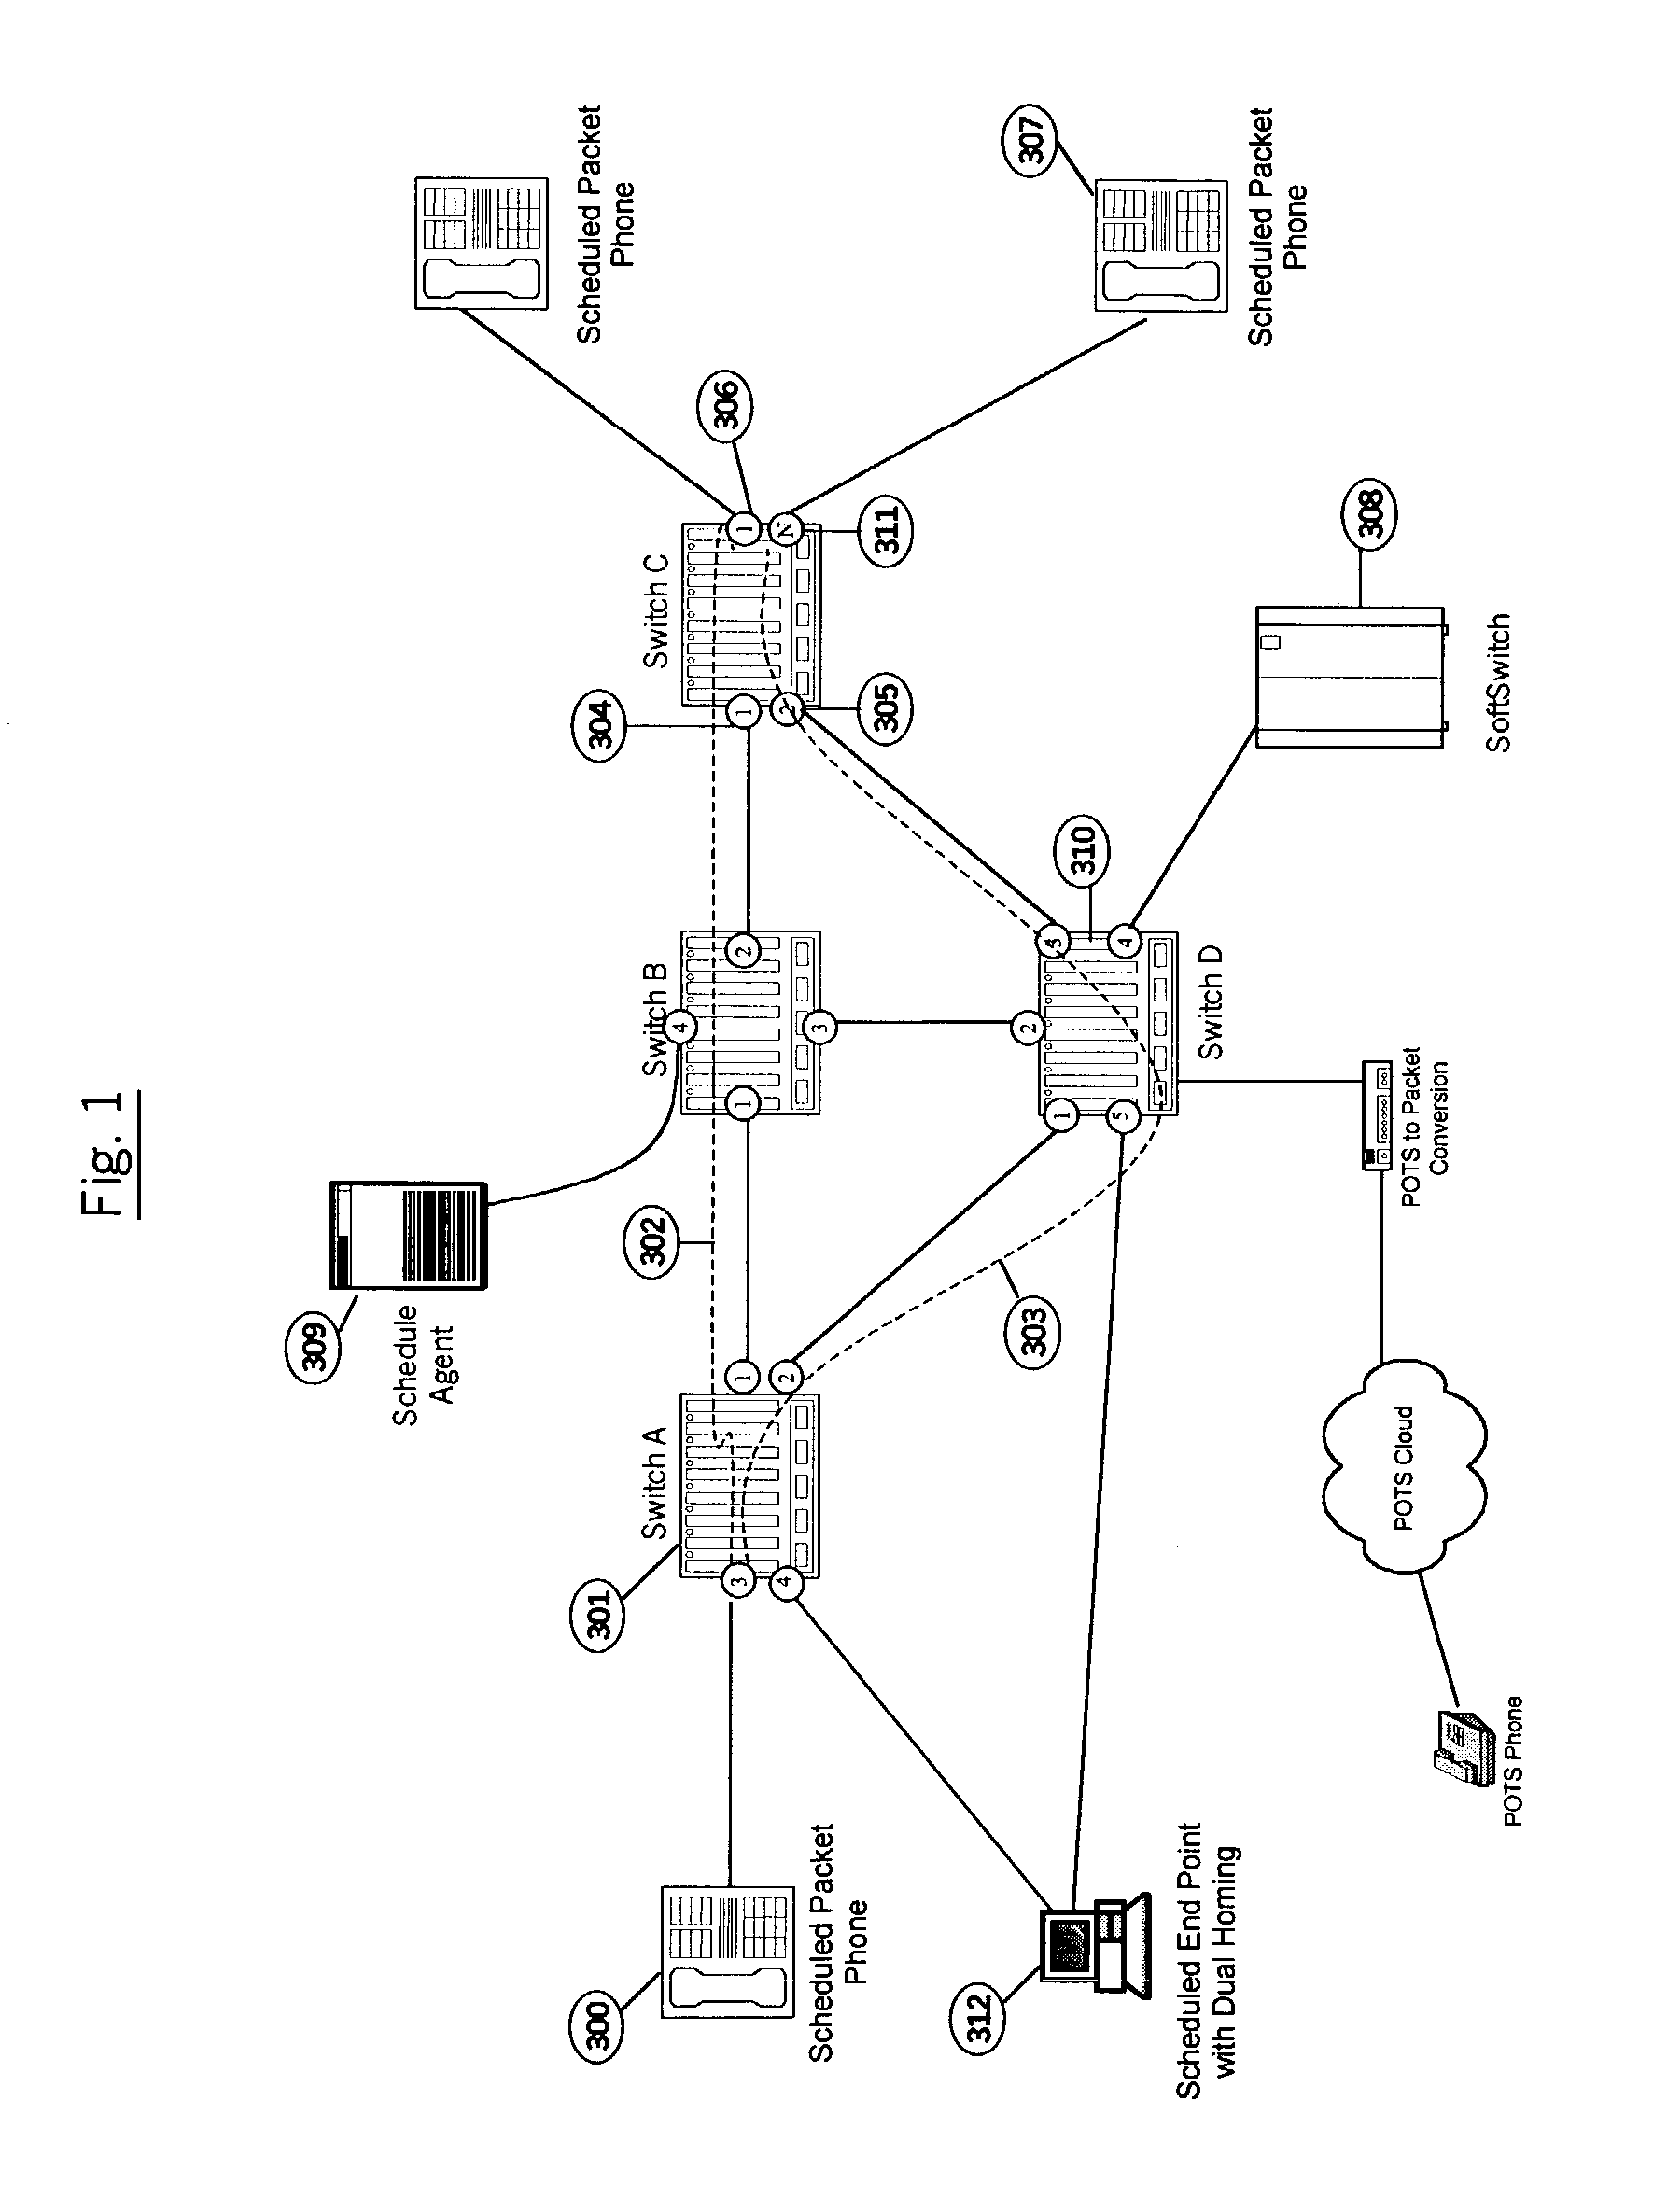 Generation of redundant scheduled network paths using a branch and merge technique